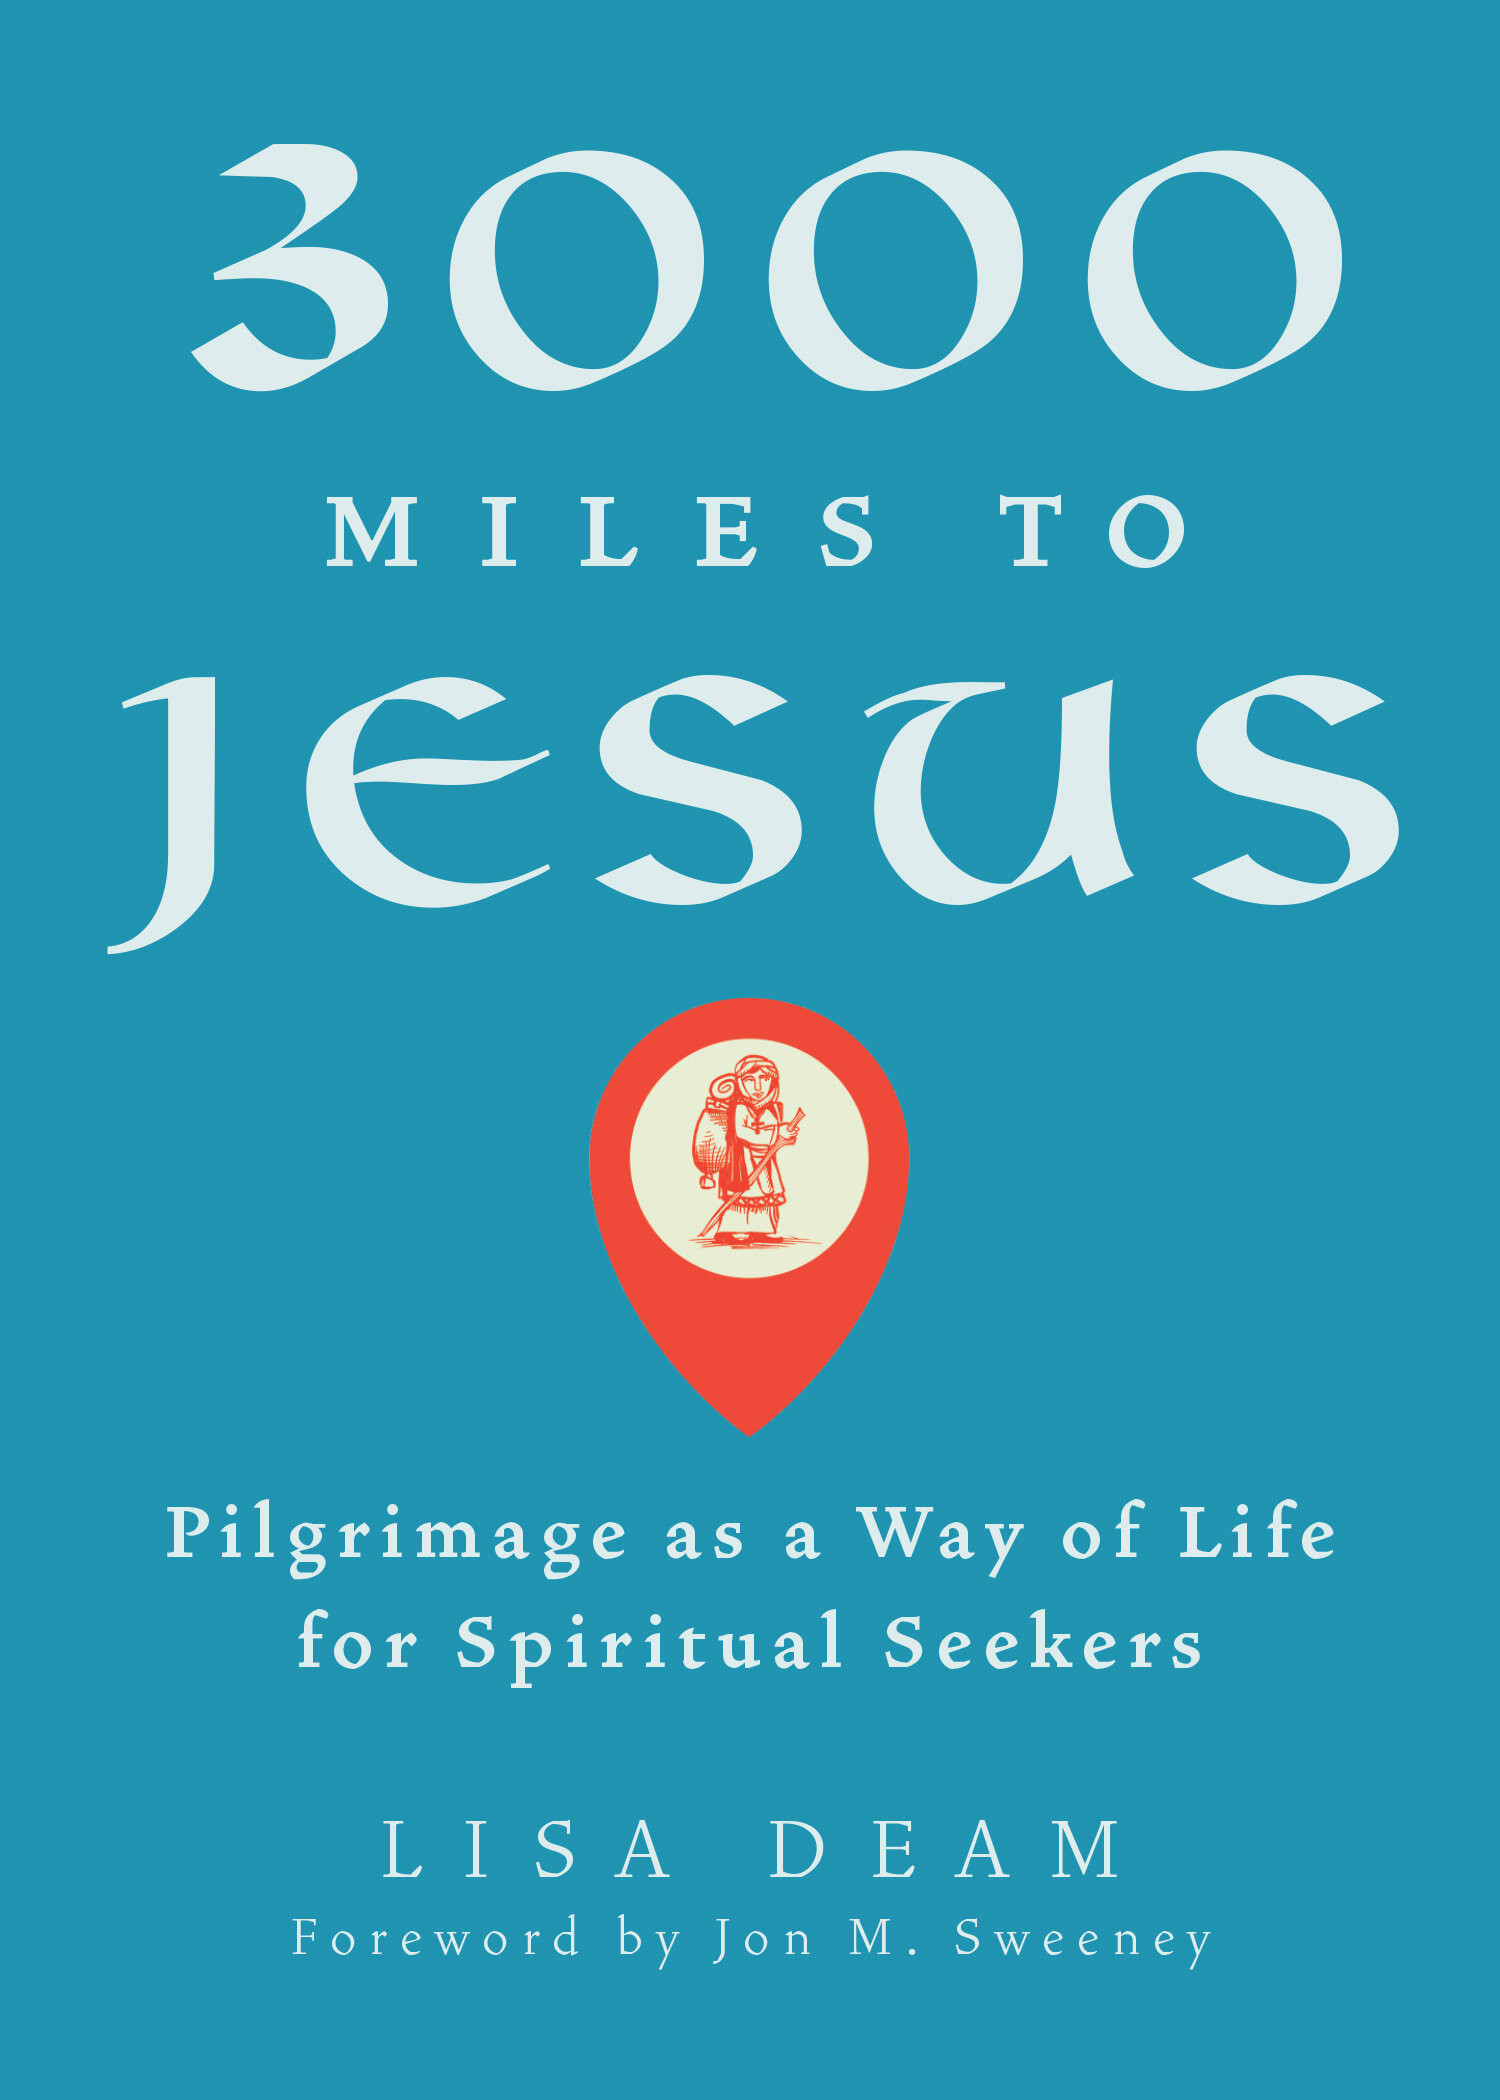 3000 Miles to Jesus: Pilgrimage as a Way of Life for Spiritual Seekers